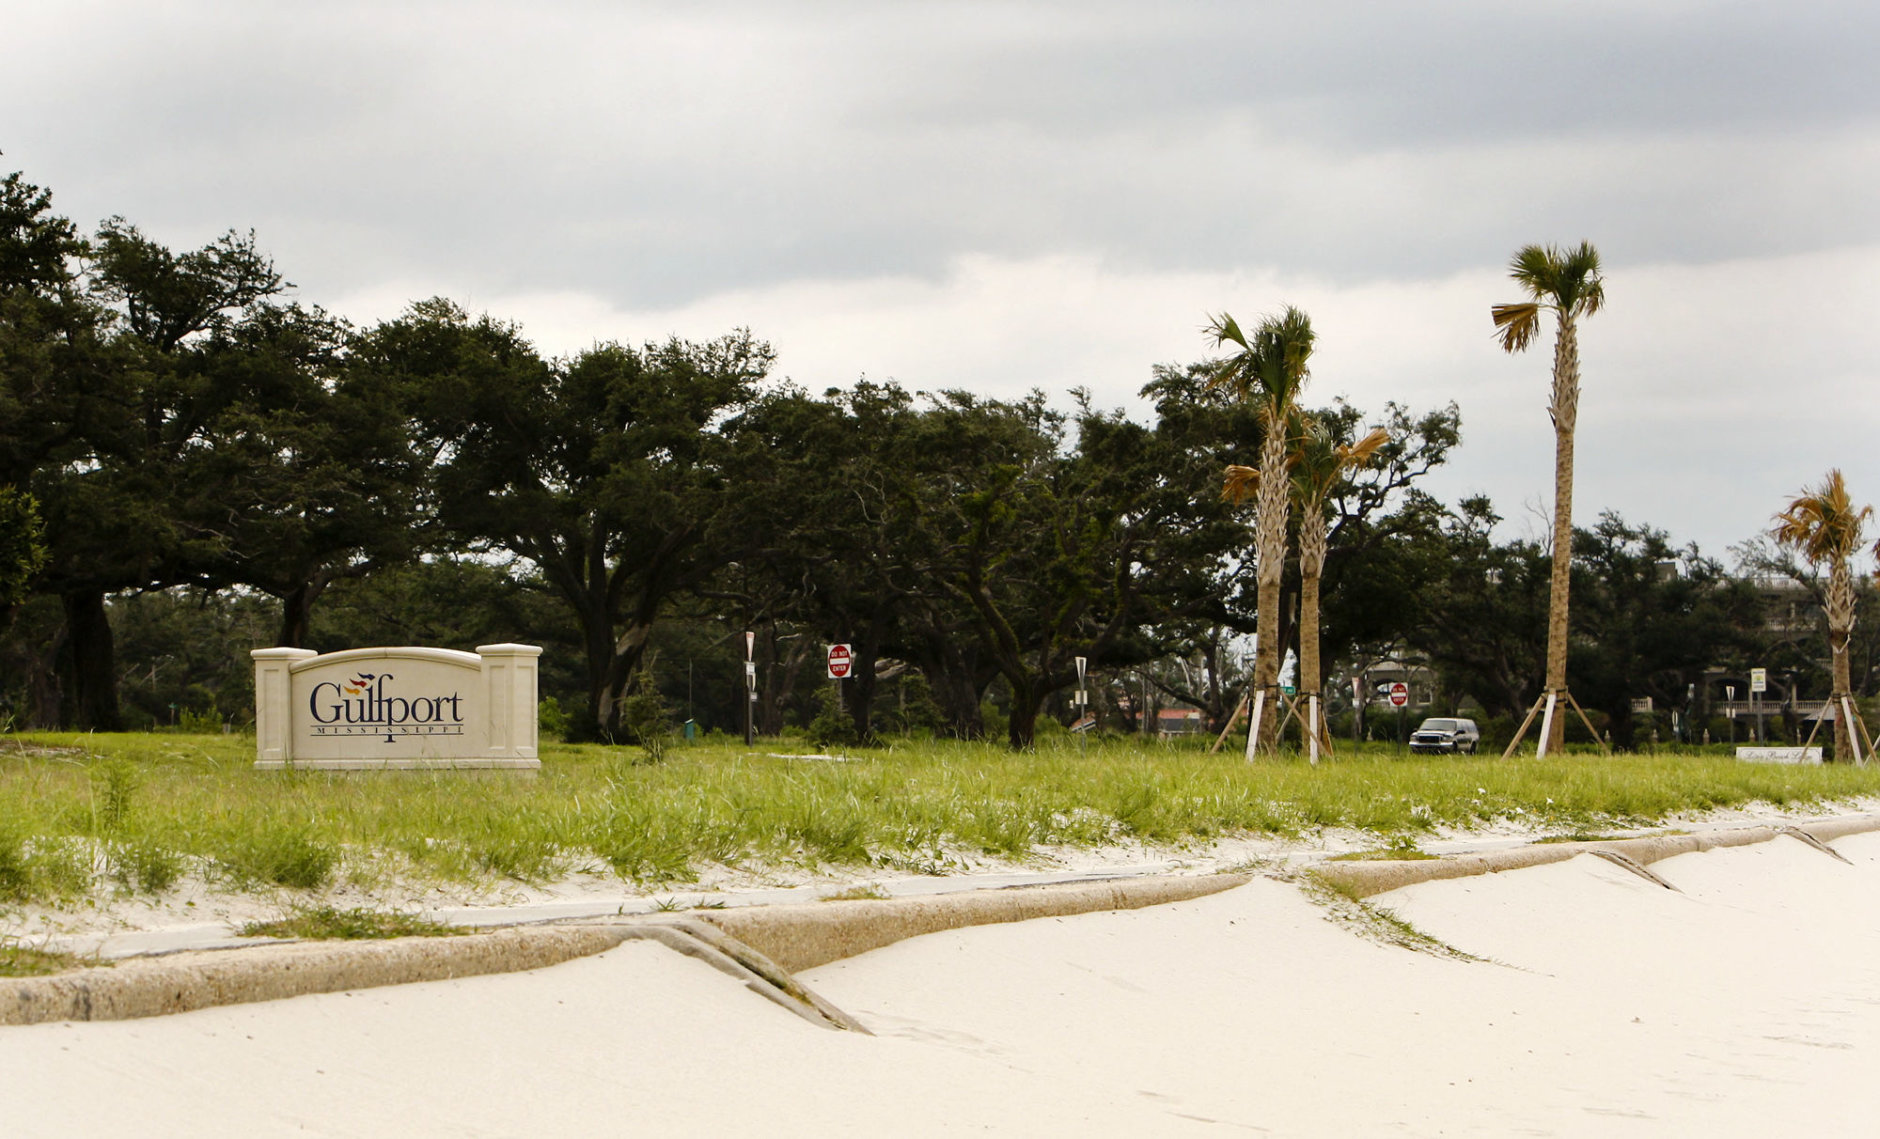 The Gulfport, Miss. sign is displayed on Highway 90, the route follows along the Gulf of New Mexico for miles, Wednesday, Aug. 12, 2009. Hurricane Camille hit the Mississippi coast on Aug.17, 1969. (AP Photo/Judi Bottoni)